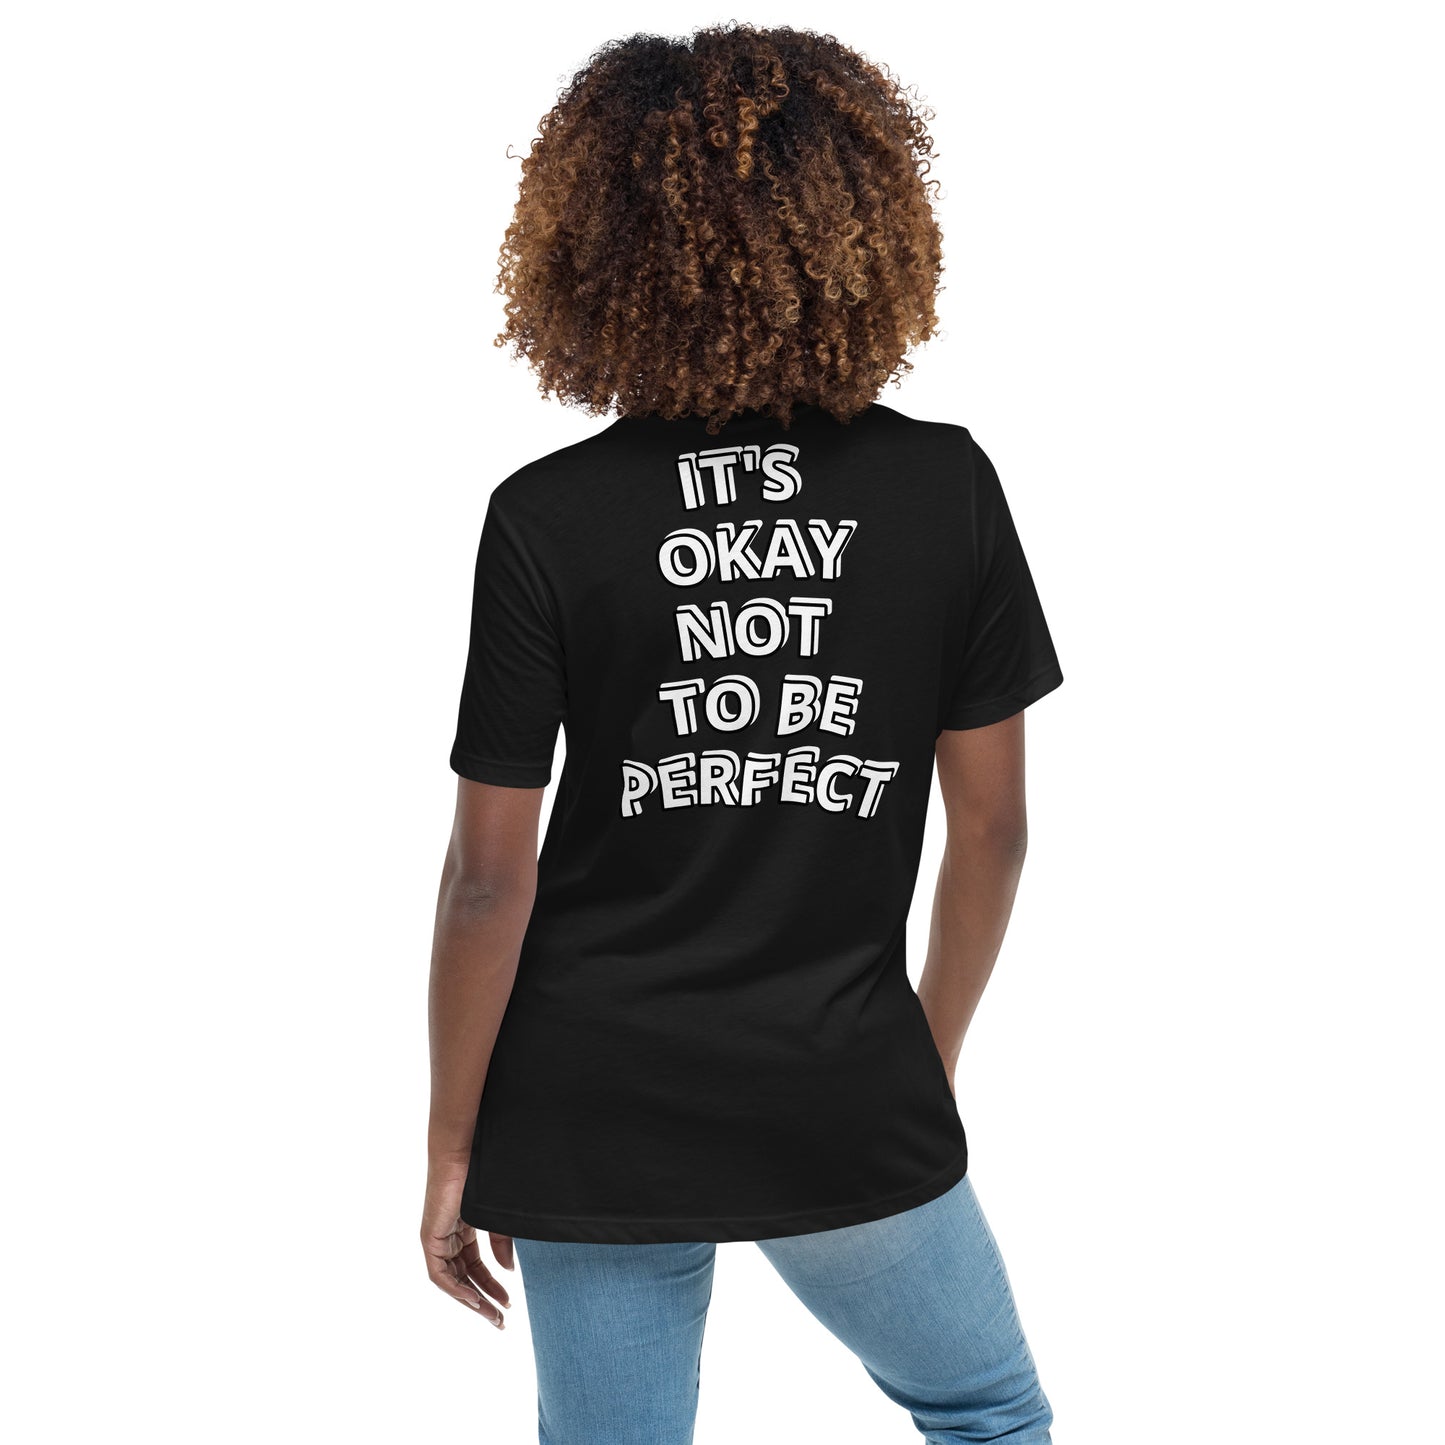 Women with black T-shirt with on the back the white text "IT'S OKAY NOT TO BE PERFECT" 